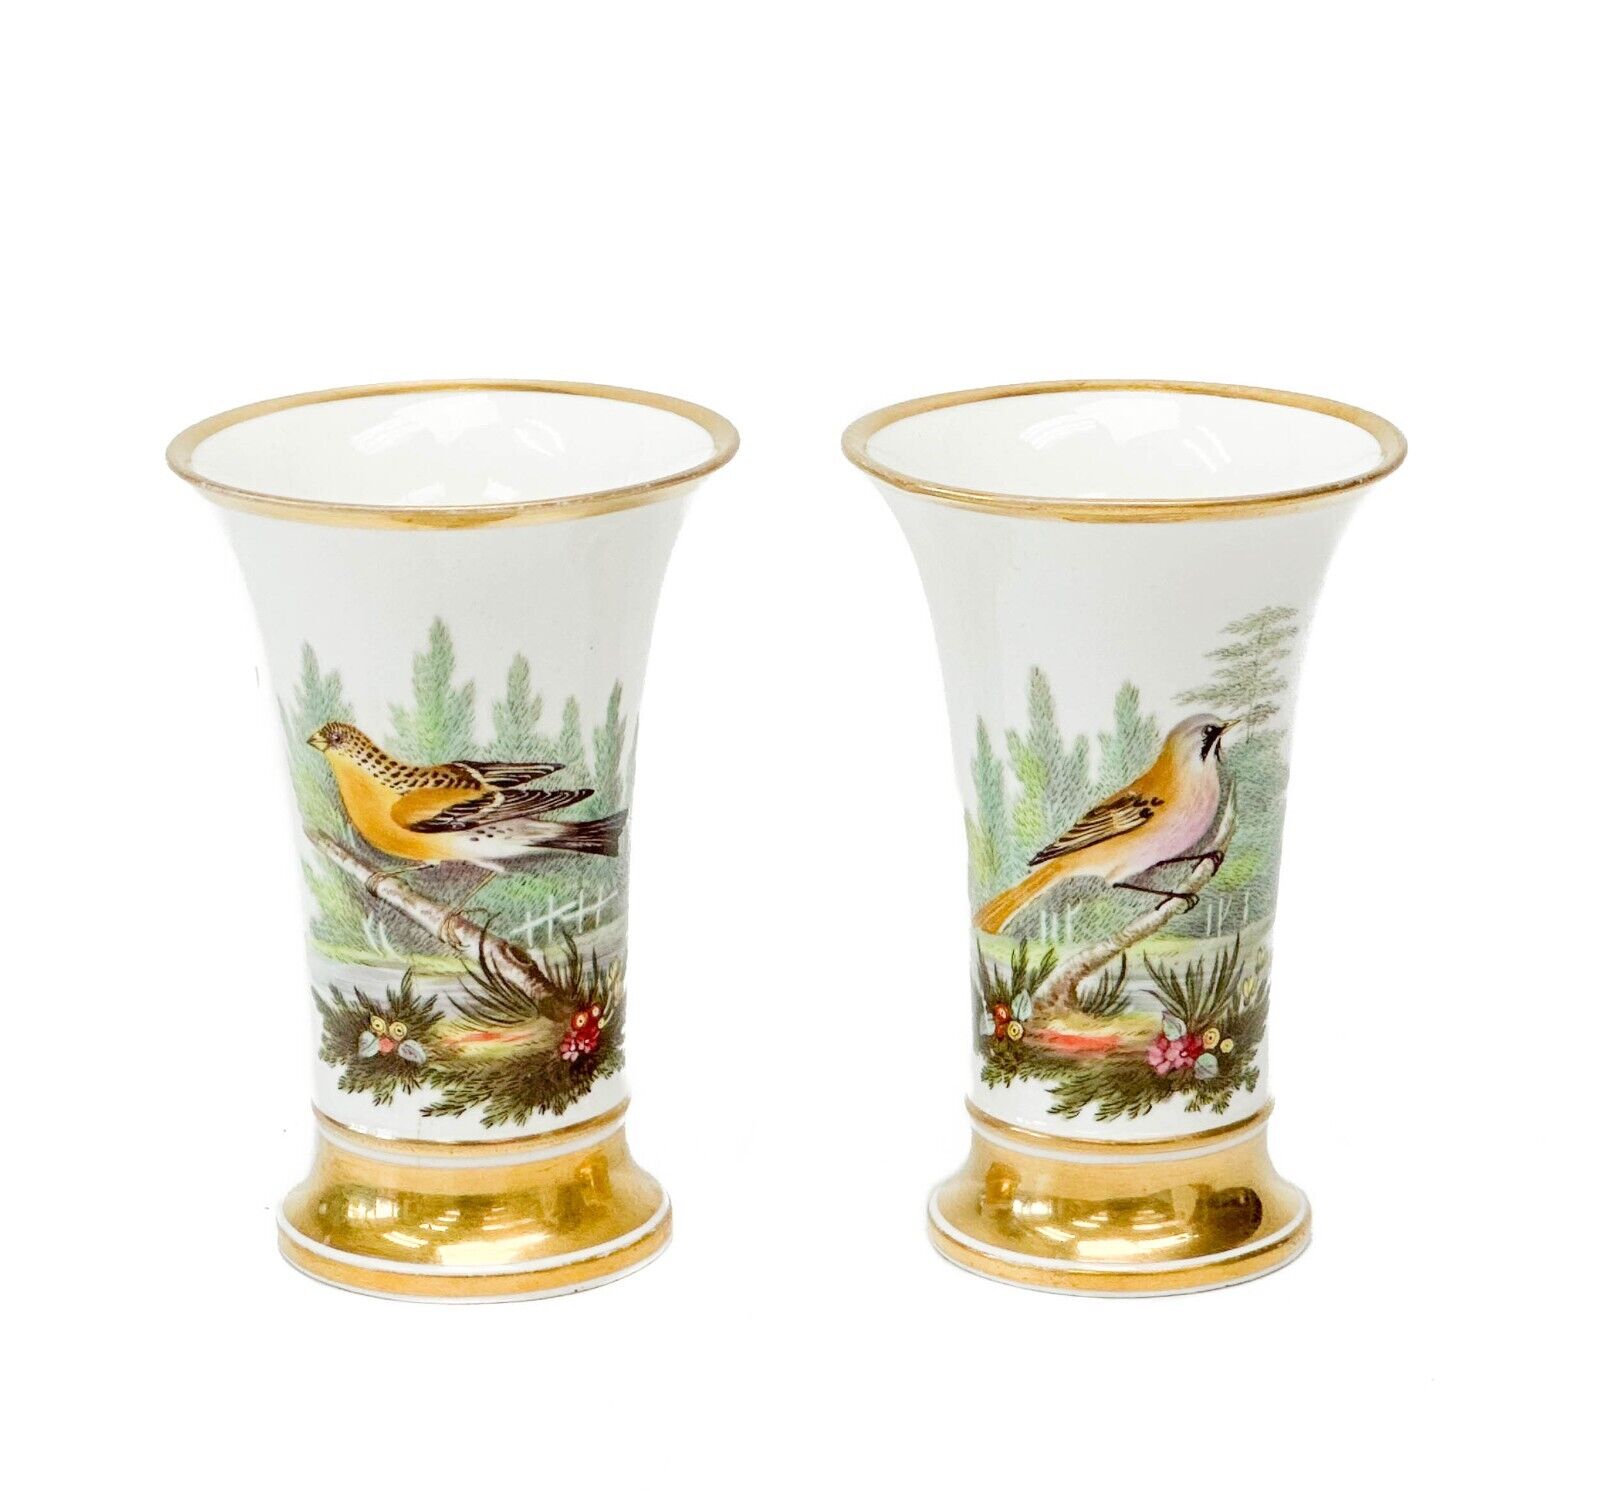 Pair Spode England Hand Painted Porcelain 4.5 inch Vases Birds c. 1815